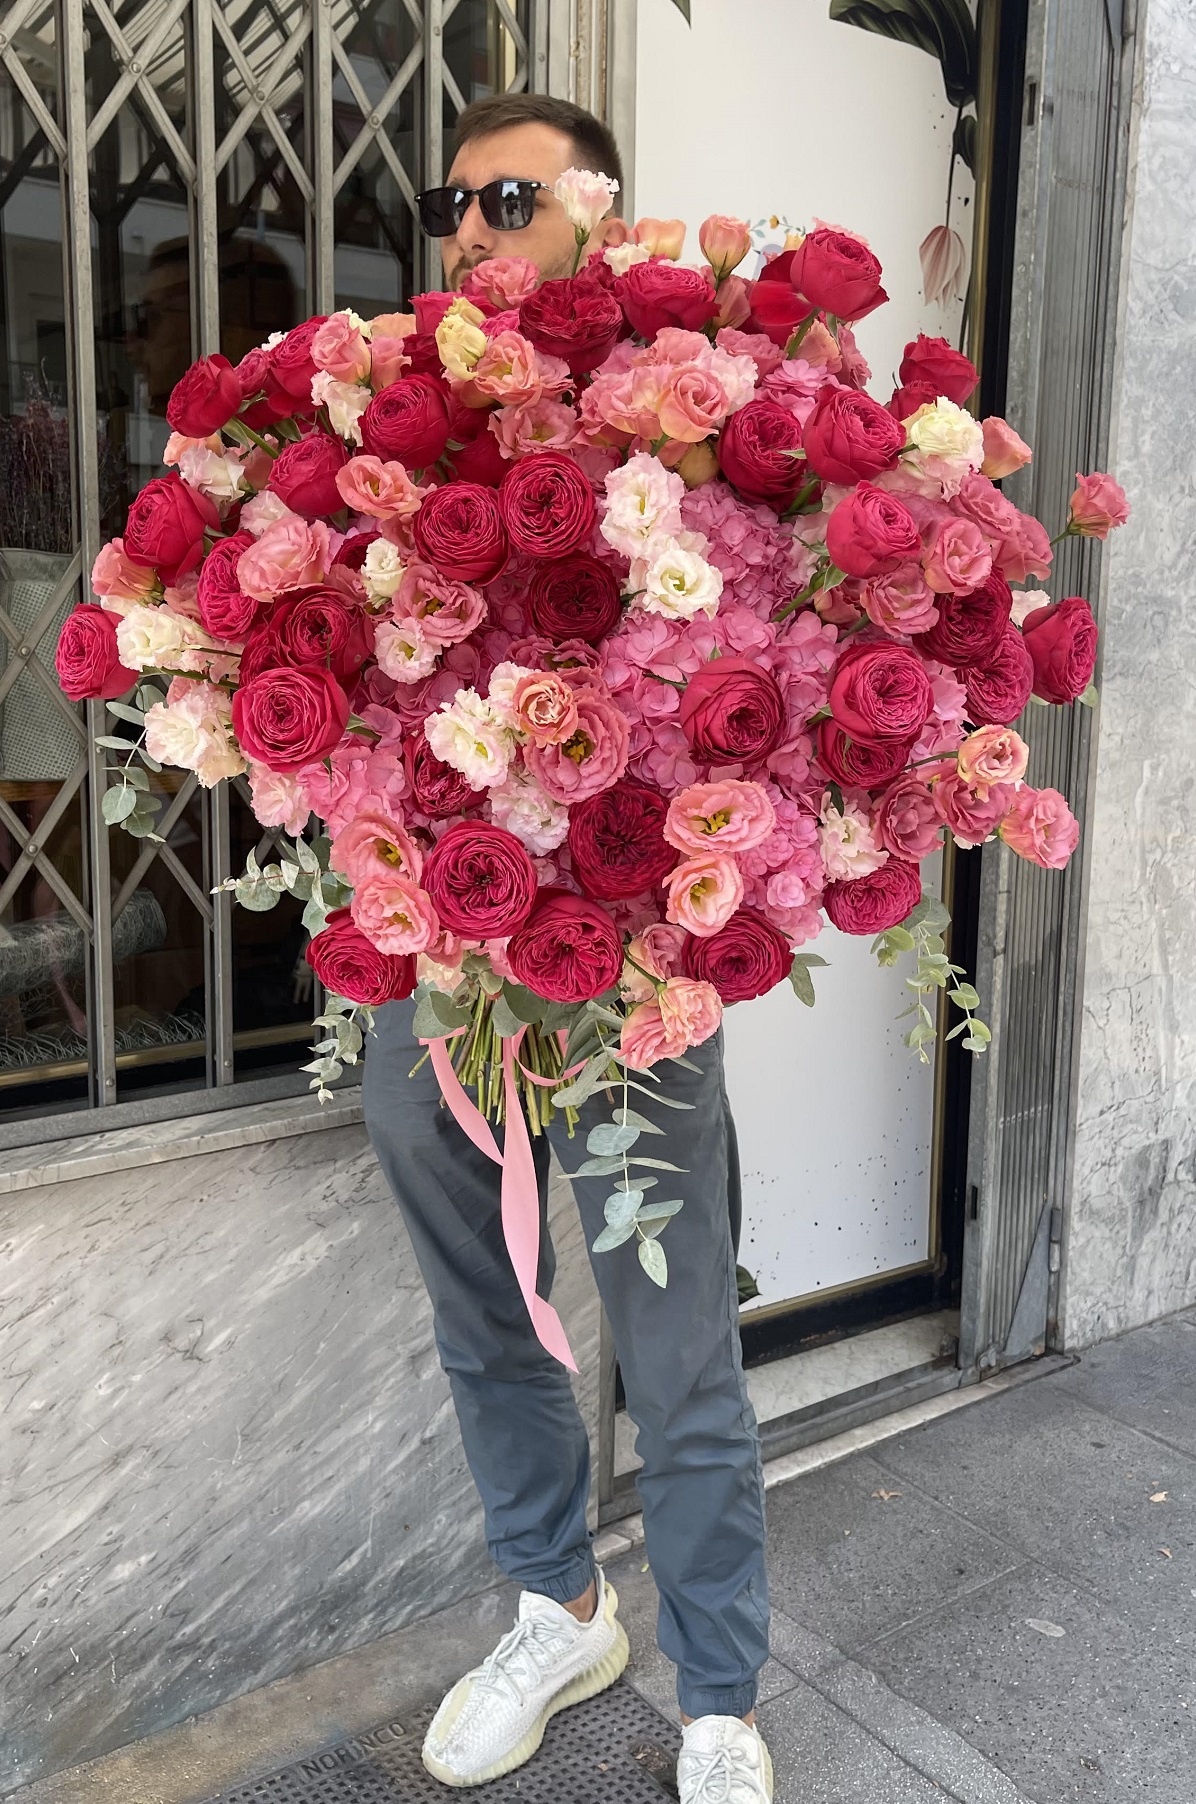 Love in Bloom: Incorporating flowers into your Valentine's Day proposal